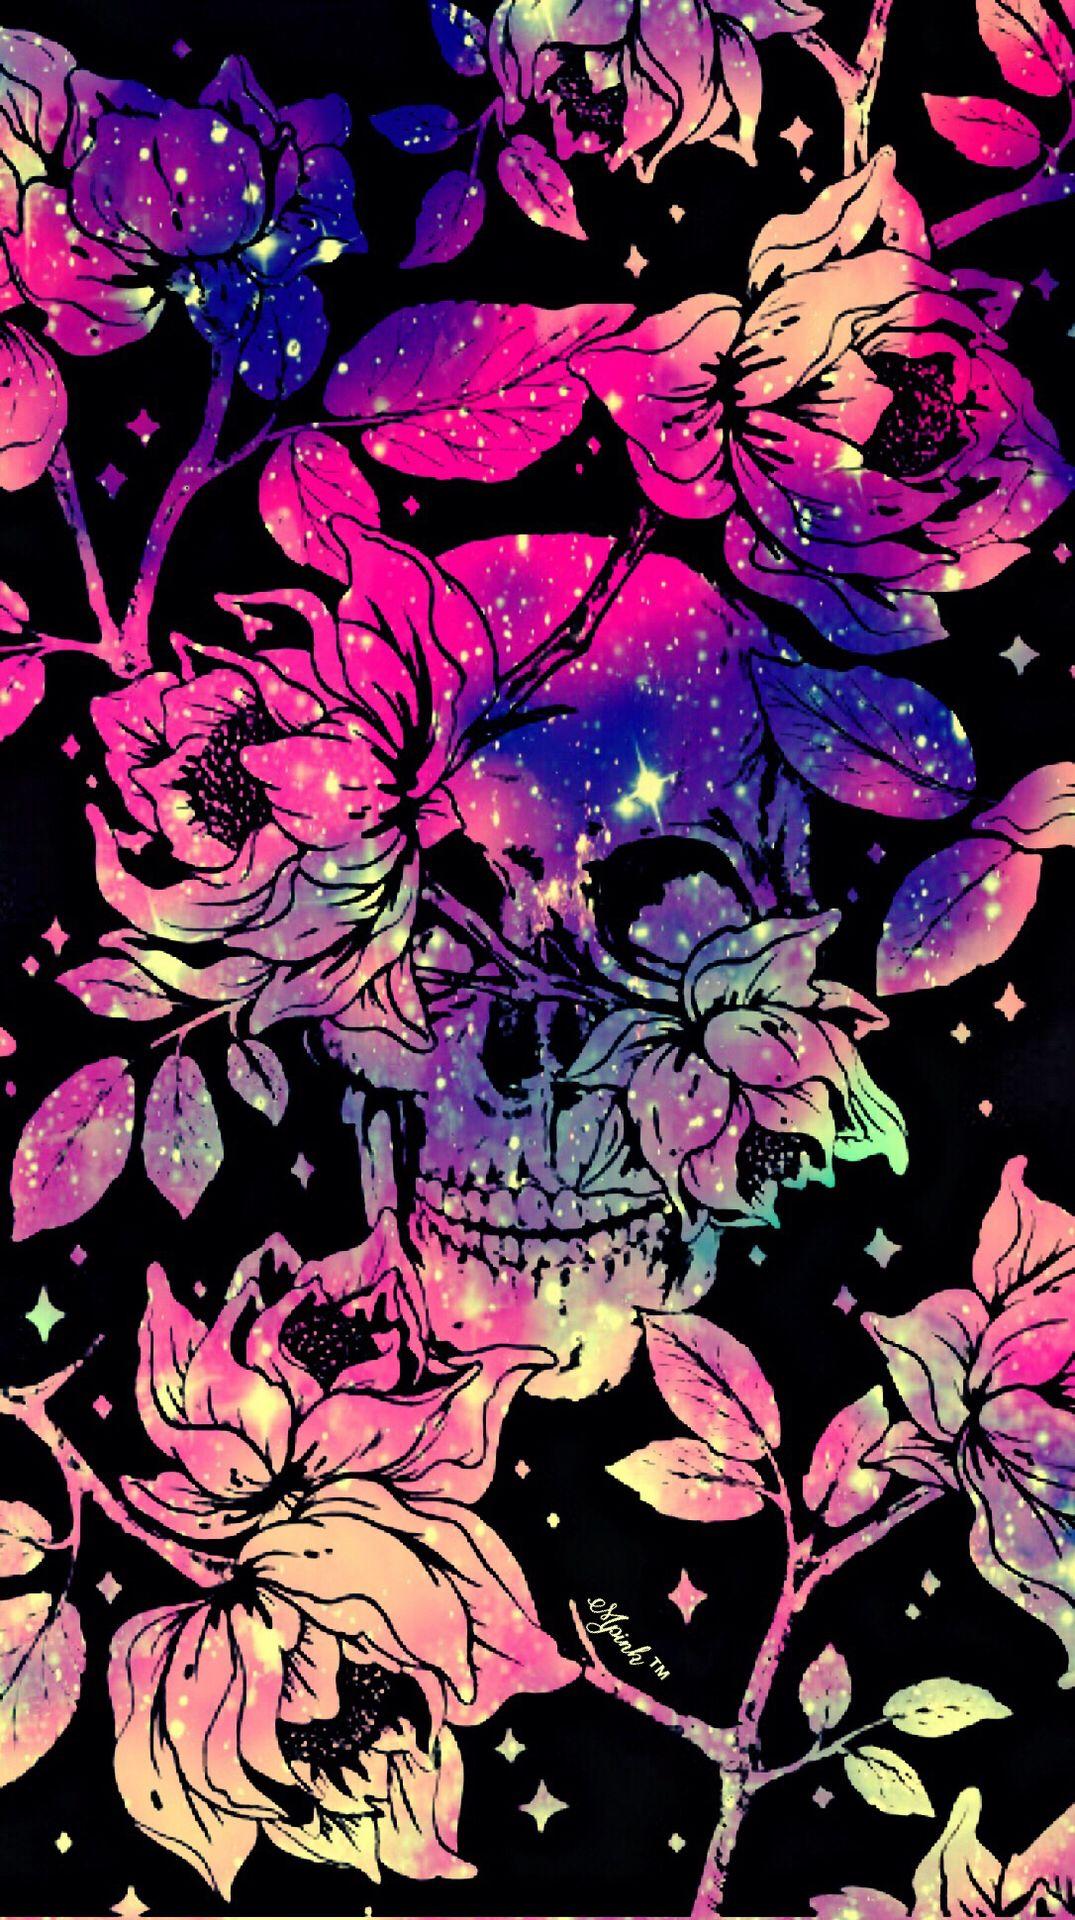 Skull & Roses Grunge Galaxy IPhone Android Wallpaper I